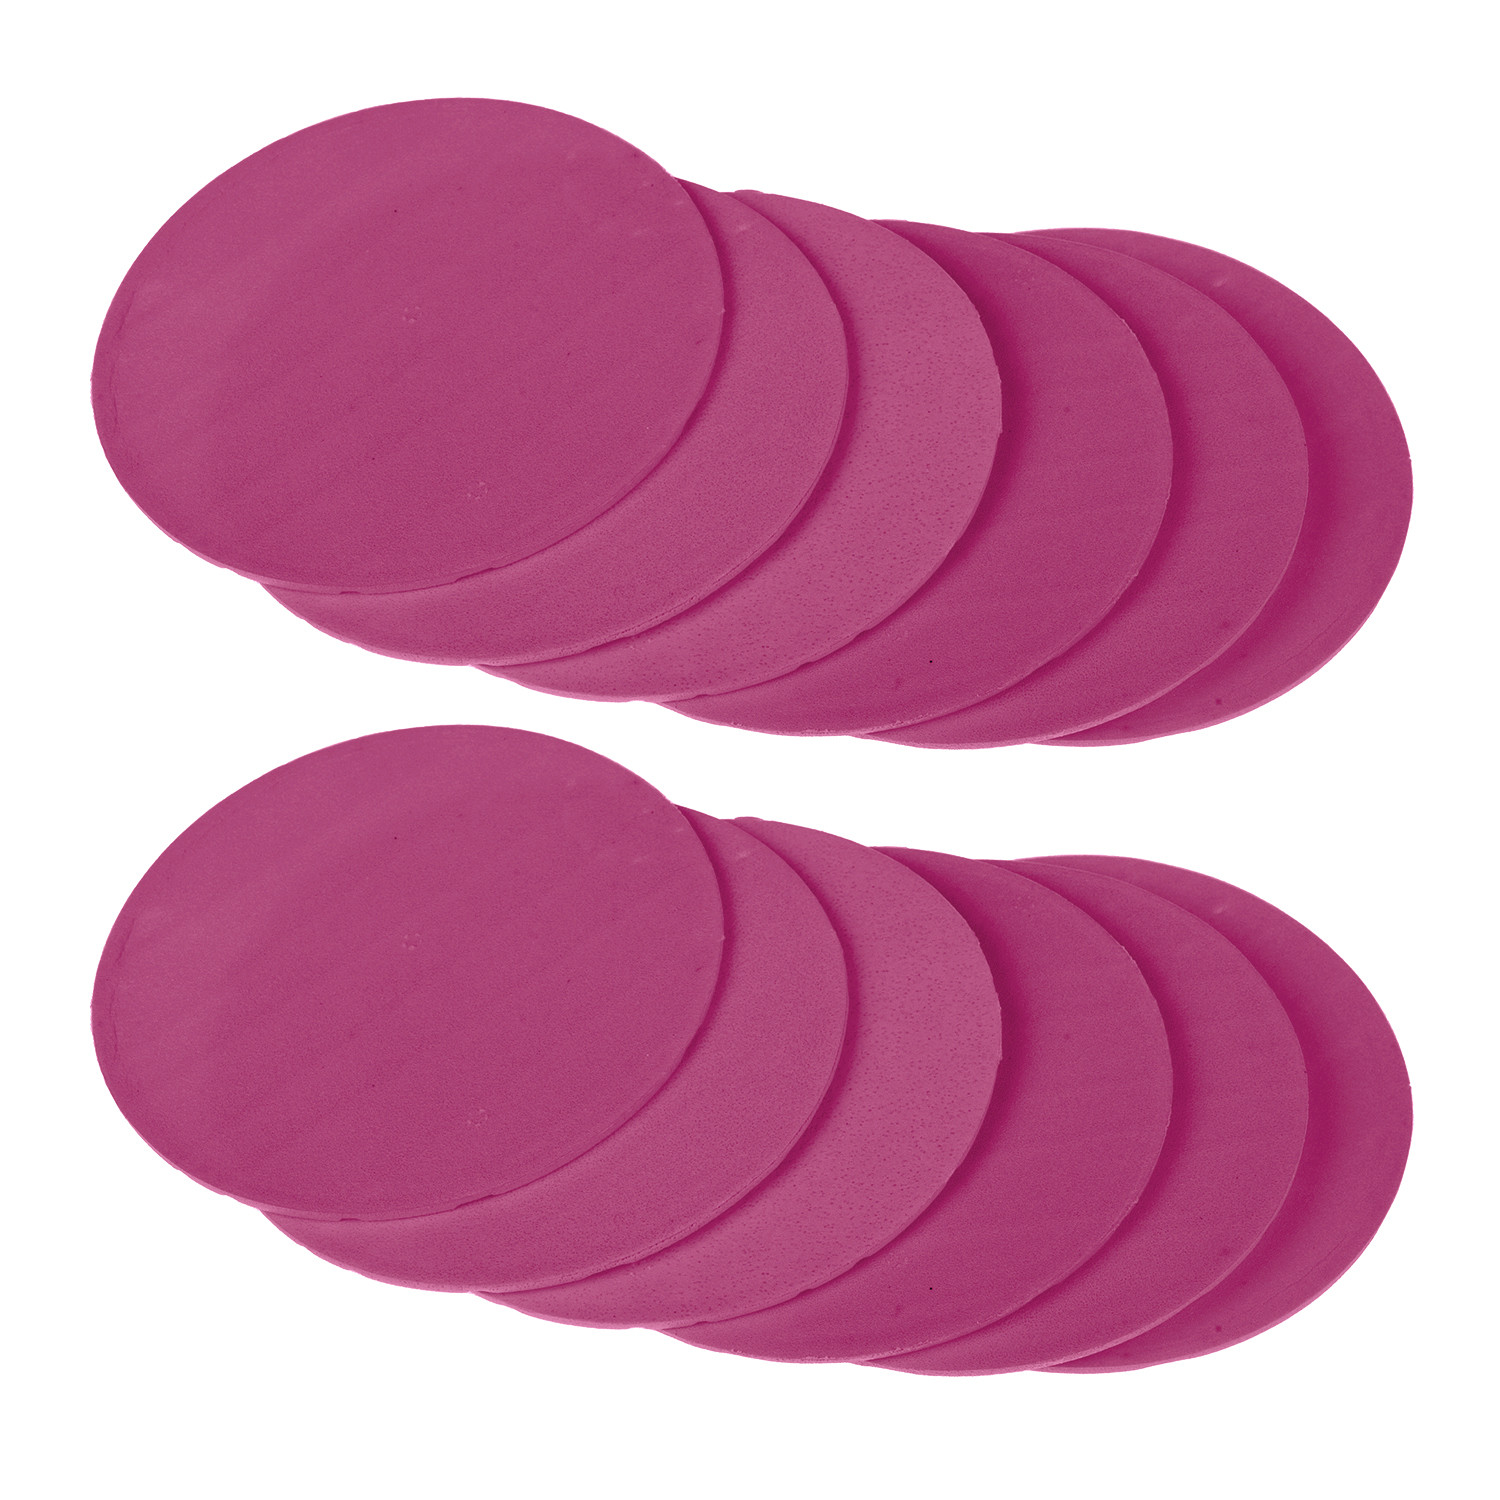 Kuber Industries Coaster | Round Drink Coasters | Foam Tea Coasters for Kitchen | Coasters for Dining Table | Office Desk Coasters | Lining Round Coaster |Pink